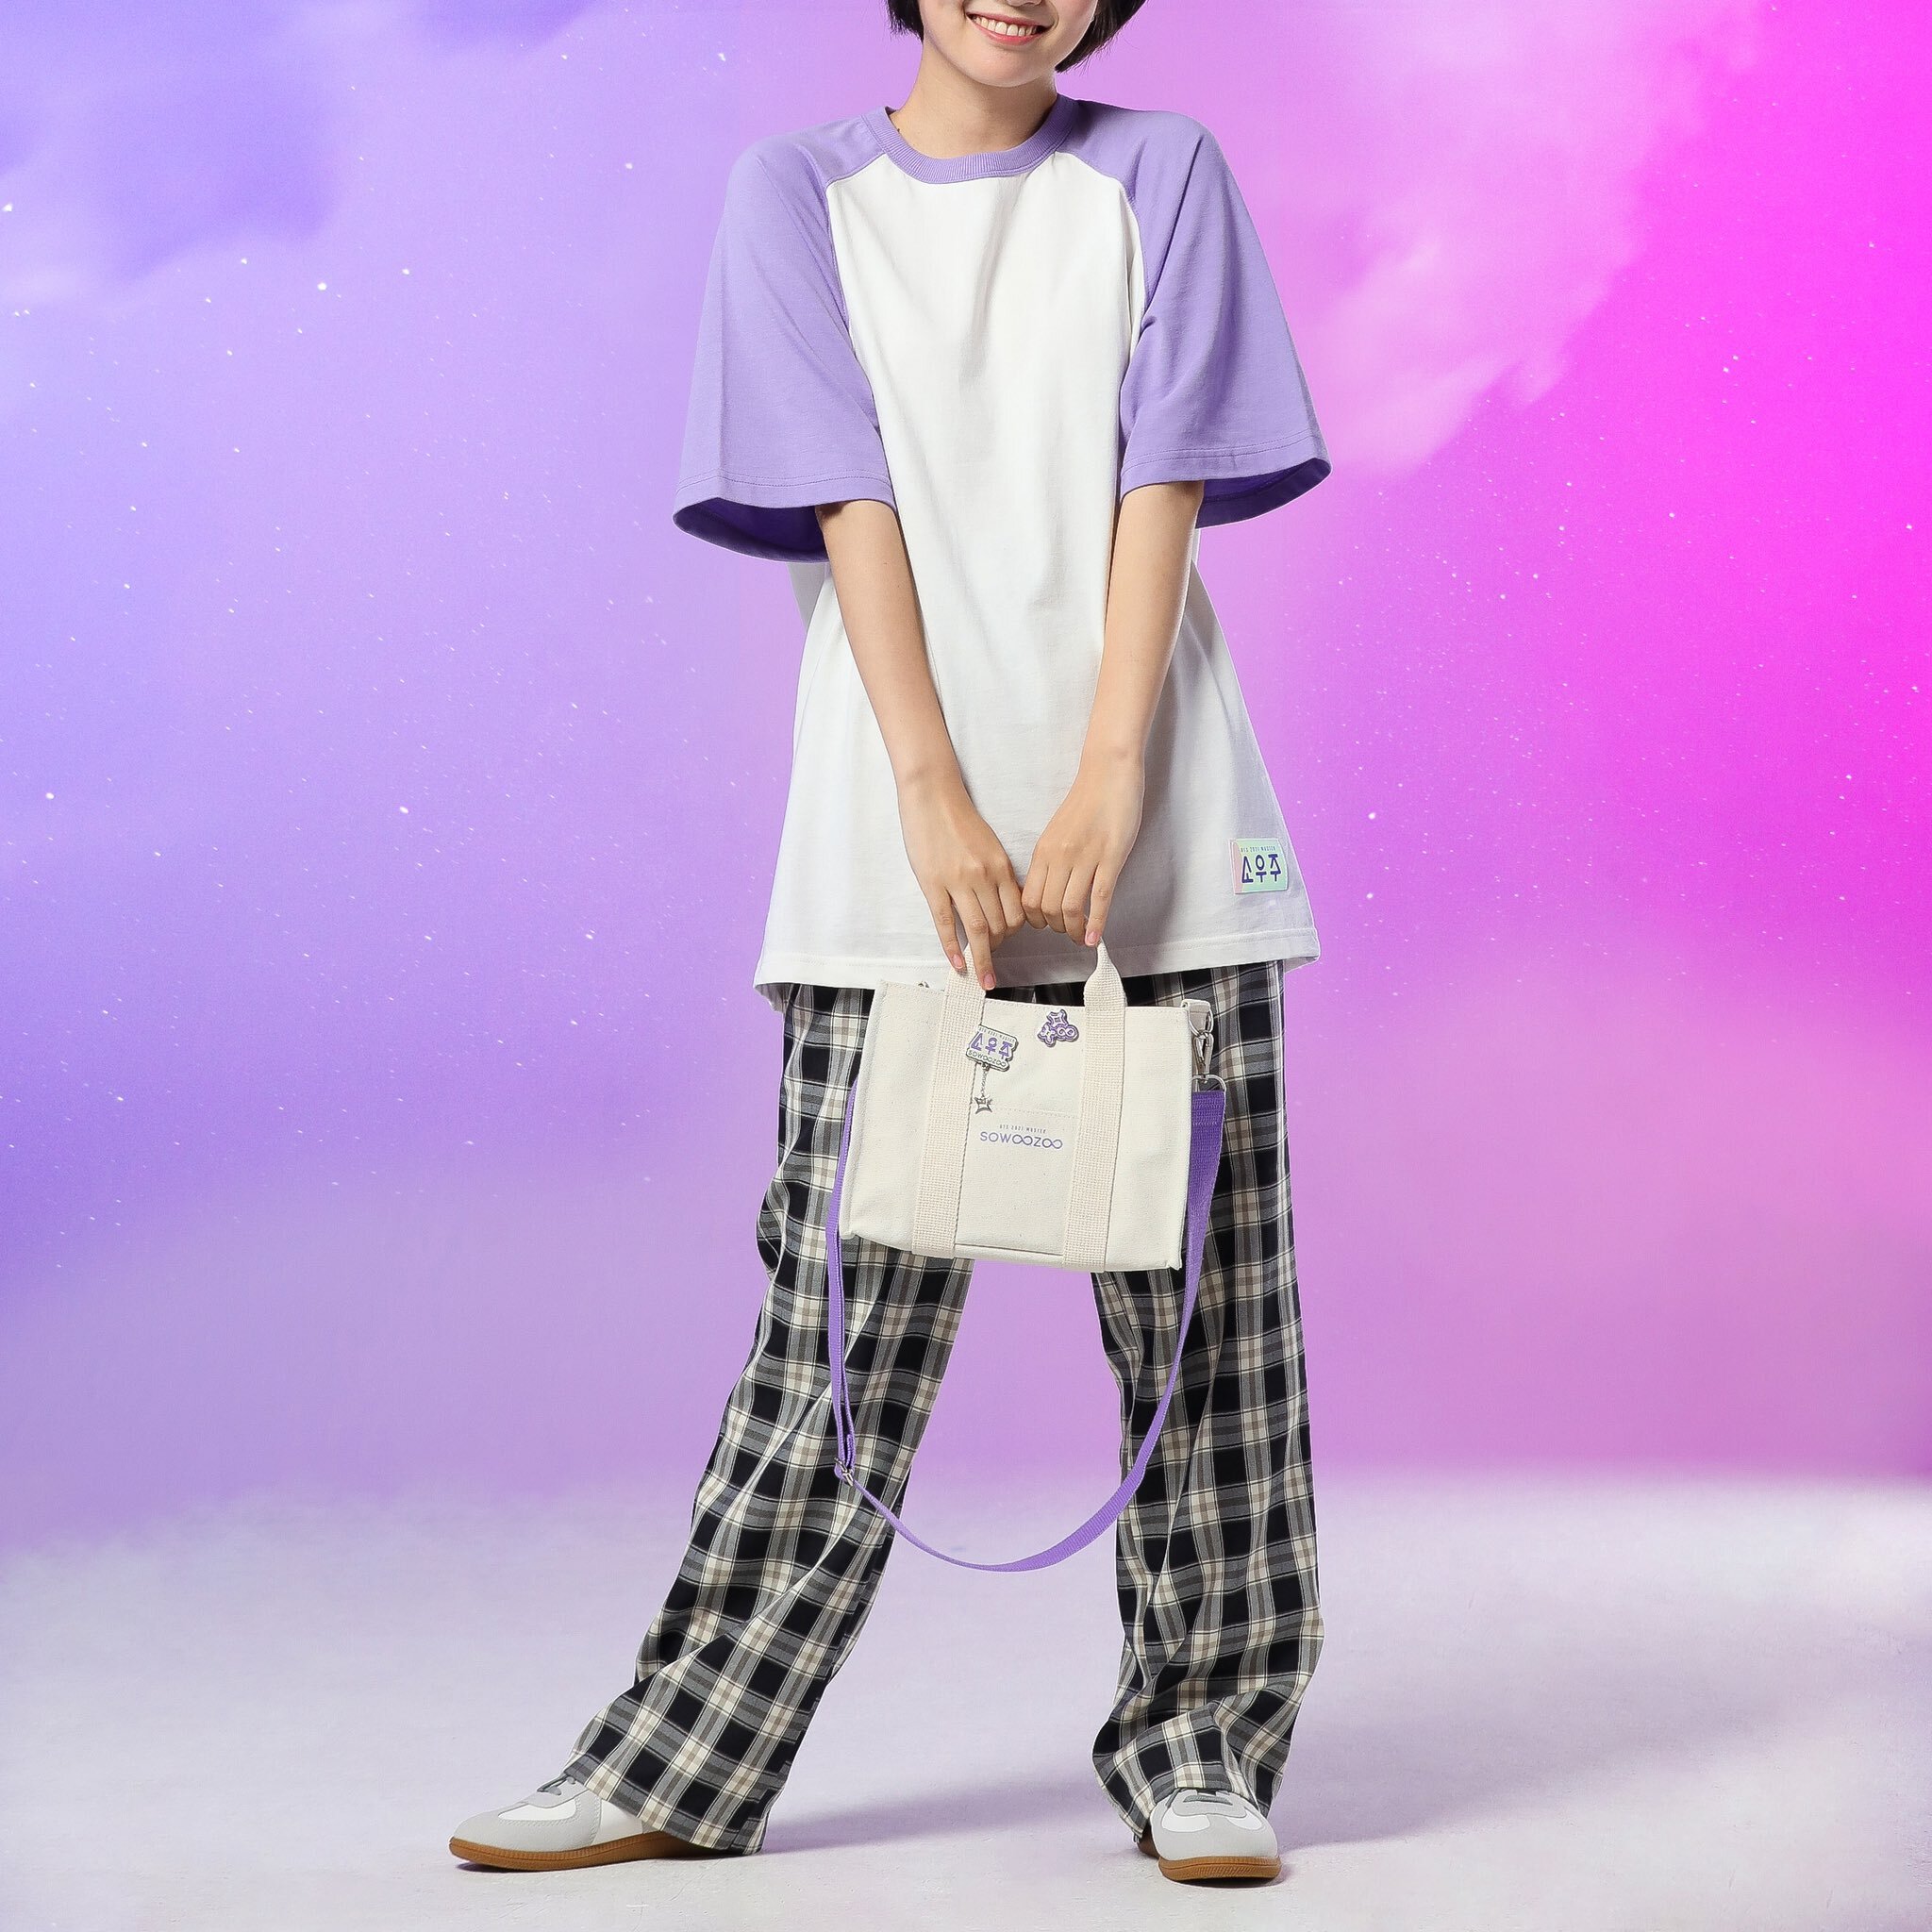 SOWOOZOO raglan short sleeve t shirt purple and ivory with the mini bag in ivory